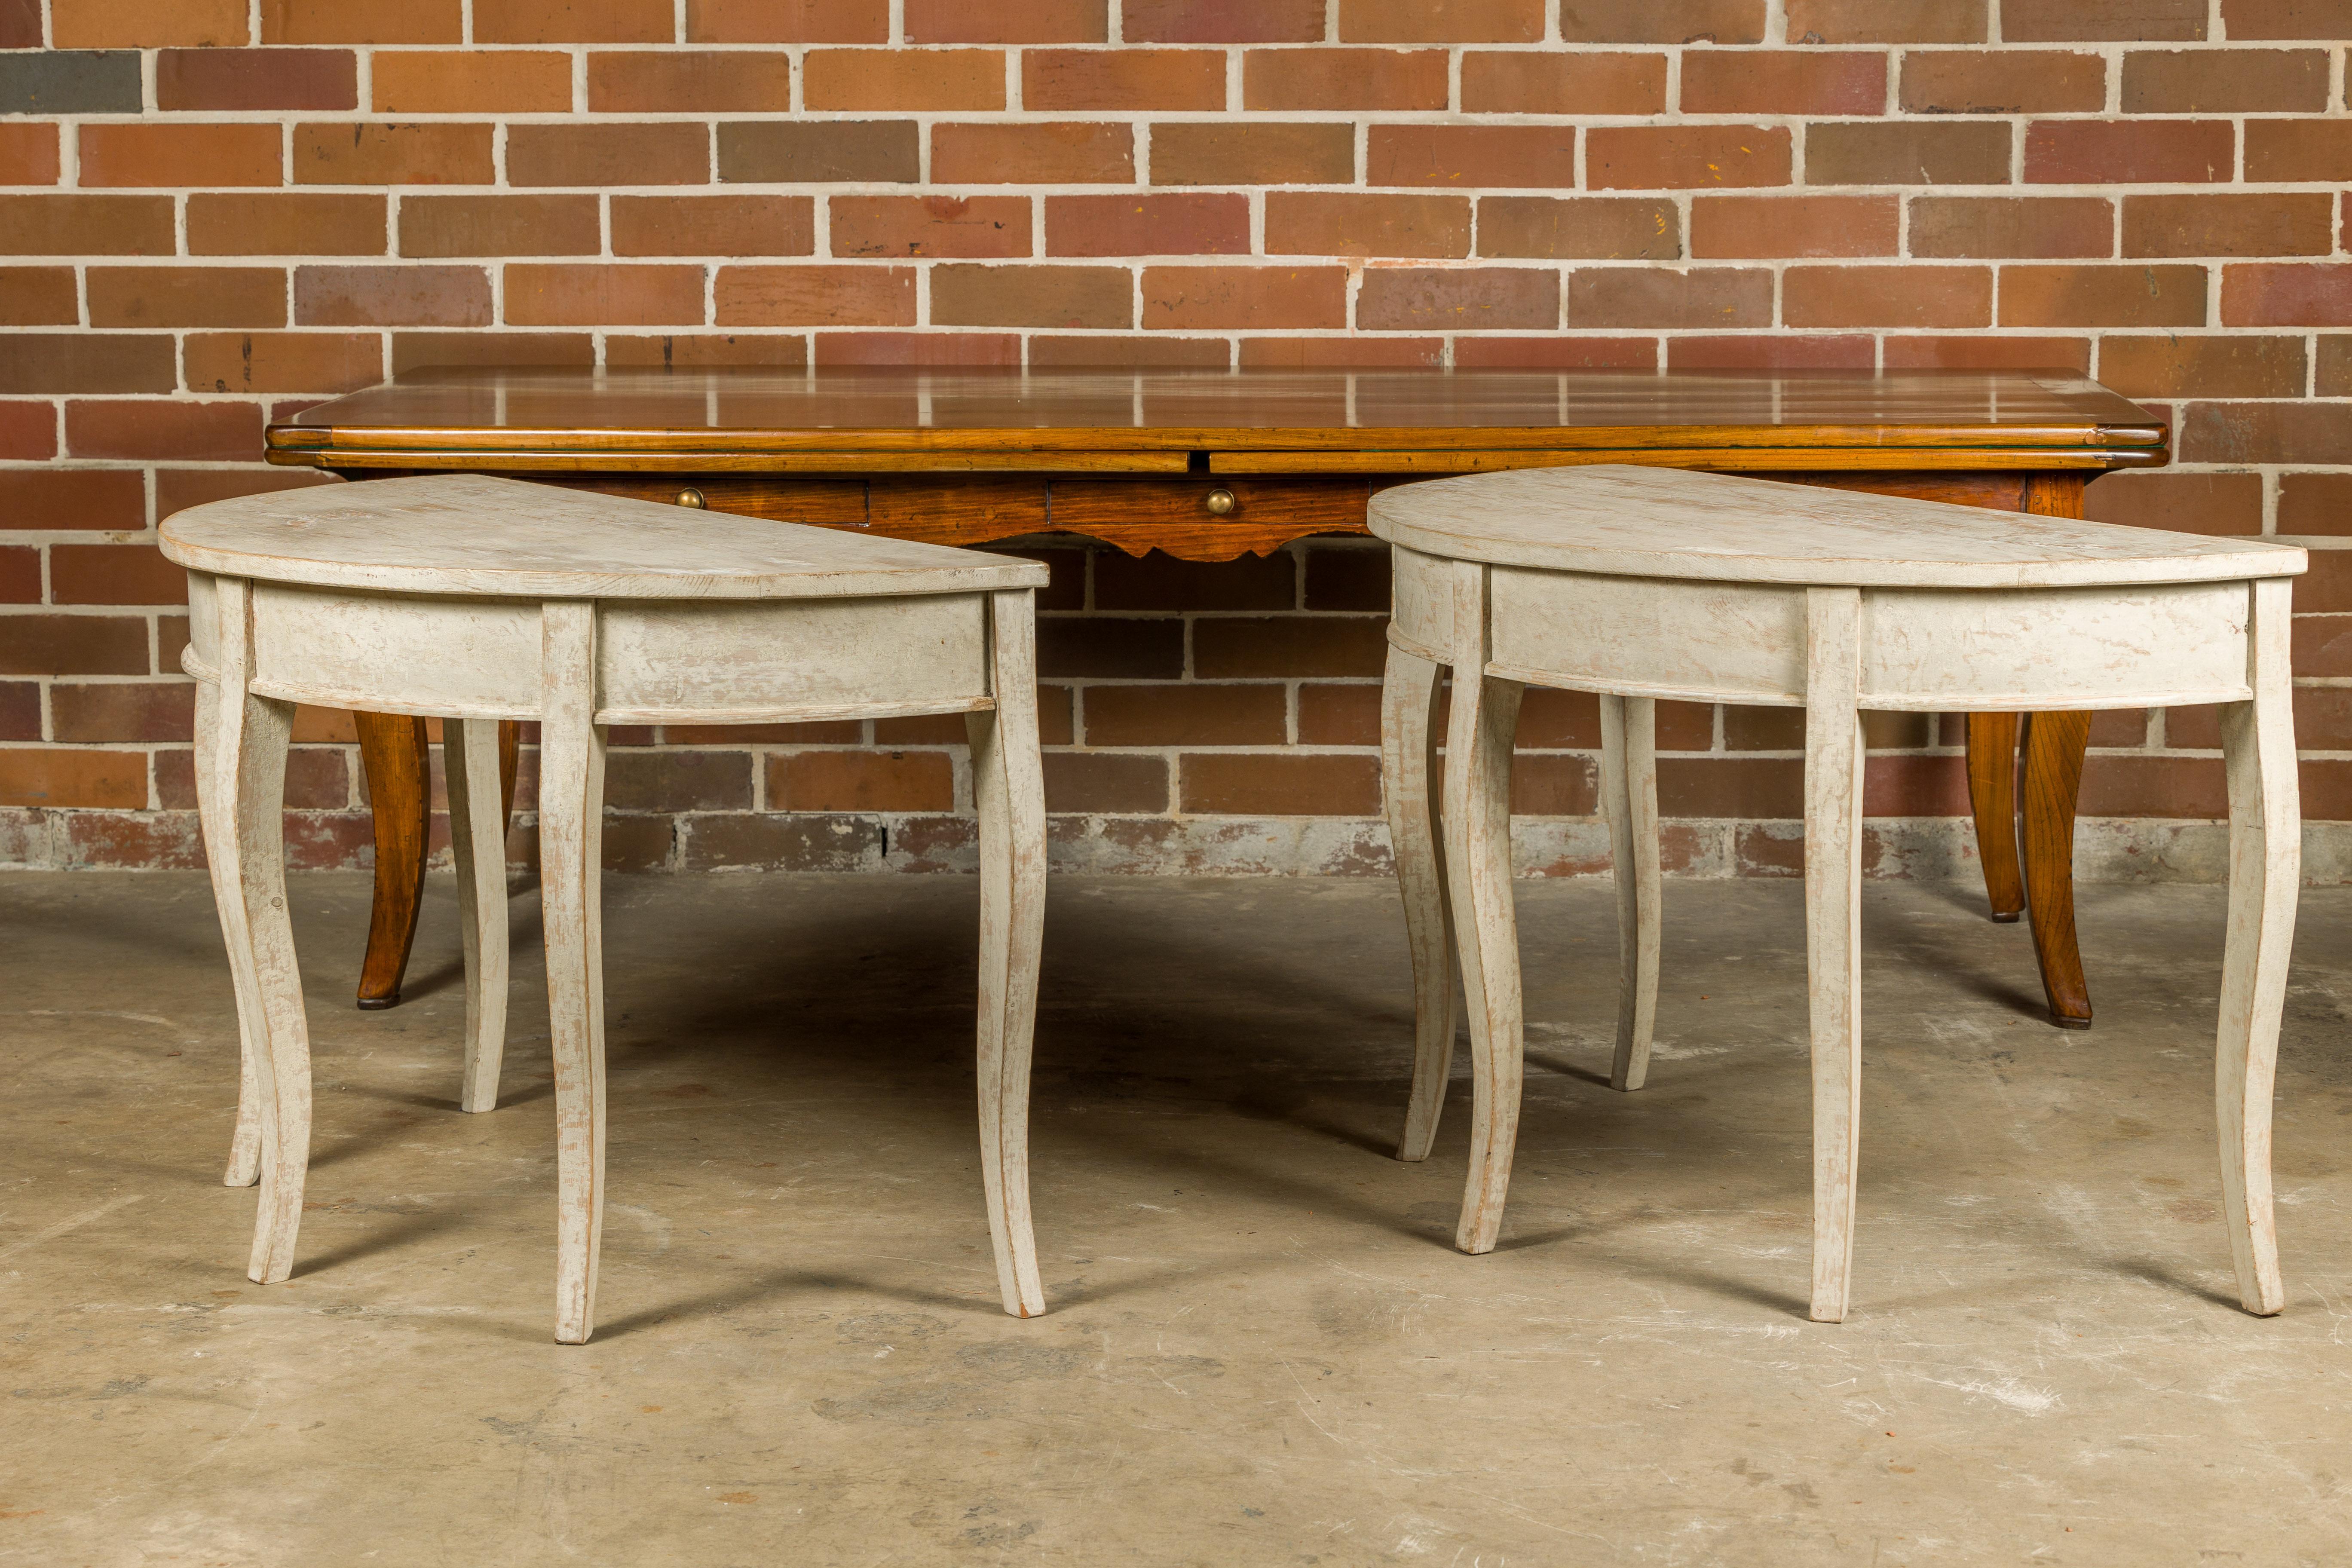 Swedish 19th Century Painted Demilune Tables with Cabriole Legs, a Pair For Sale 9